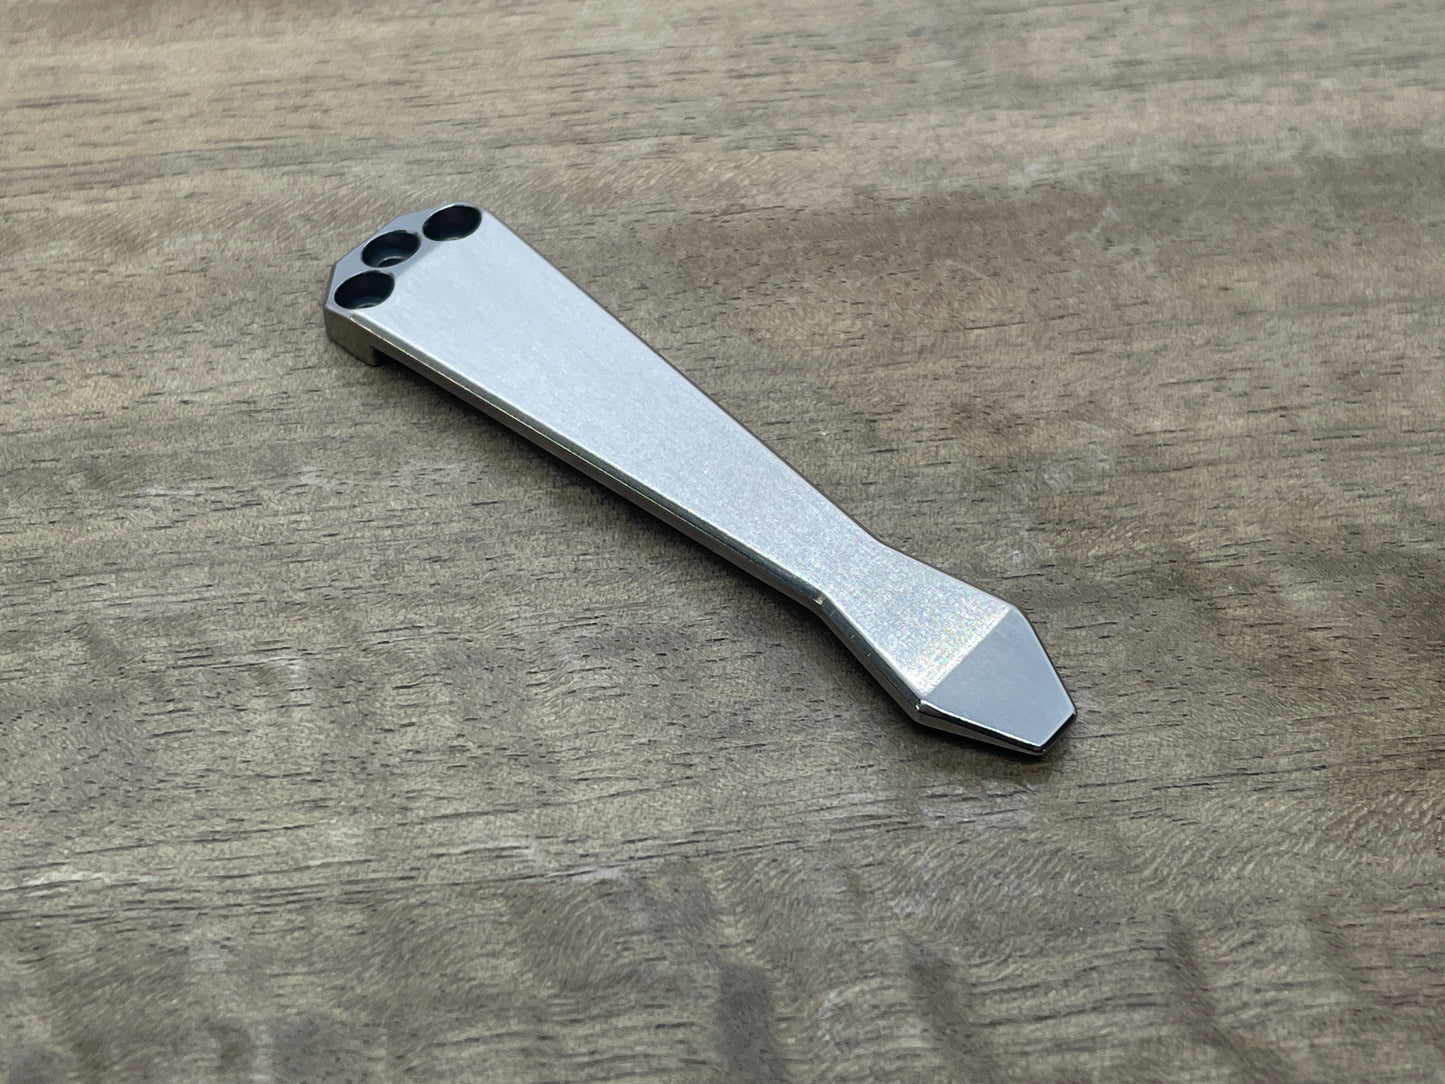 Polished Dmd Titanium CLIP for most Benchmade models